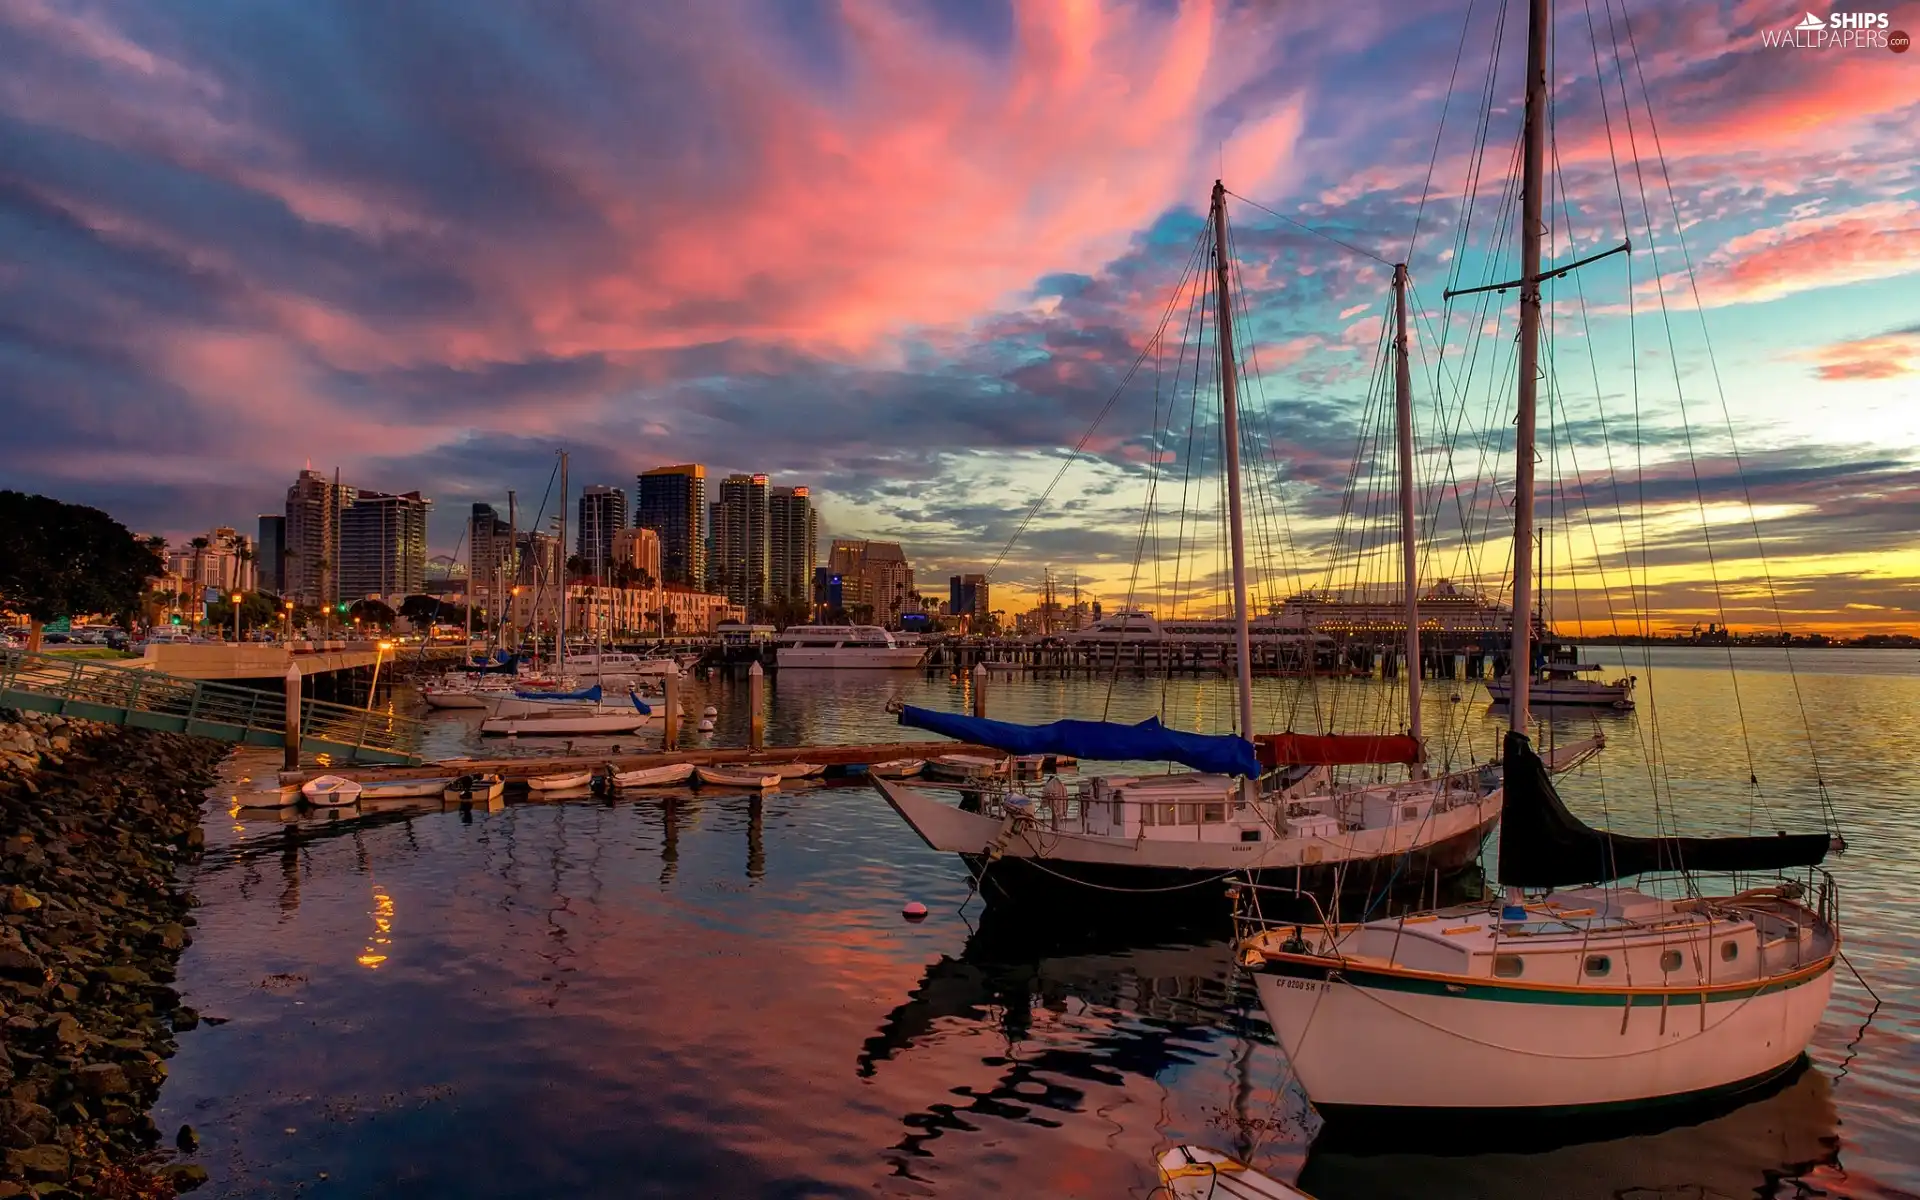 port, Yachts, town, vessels, Boats, panorama, clouds